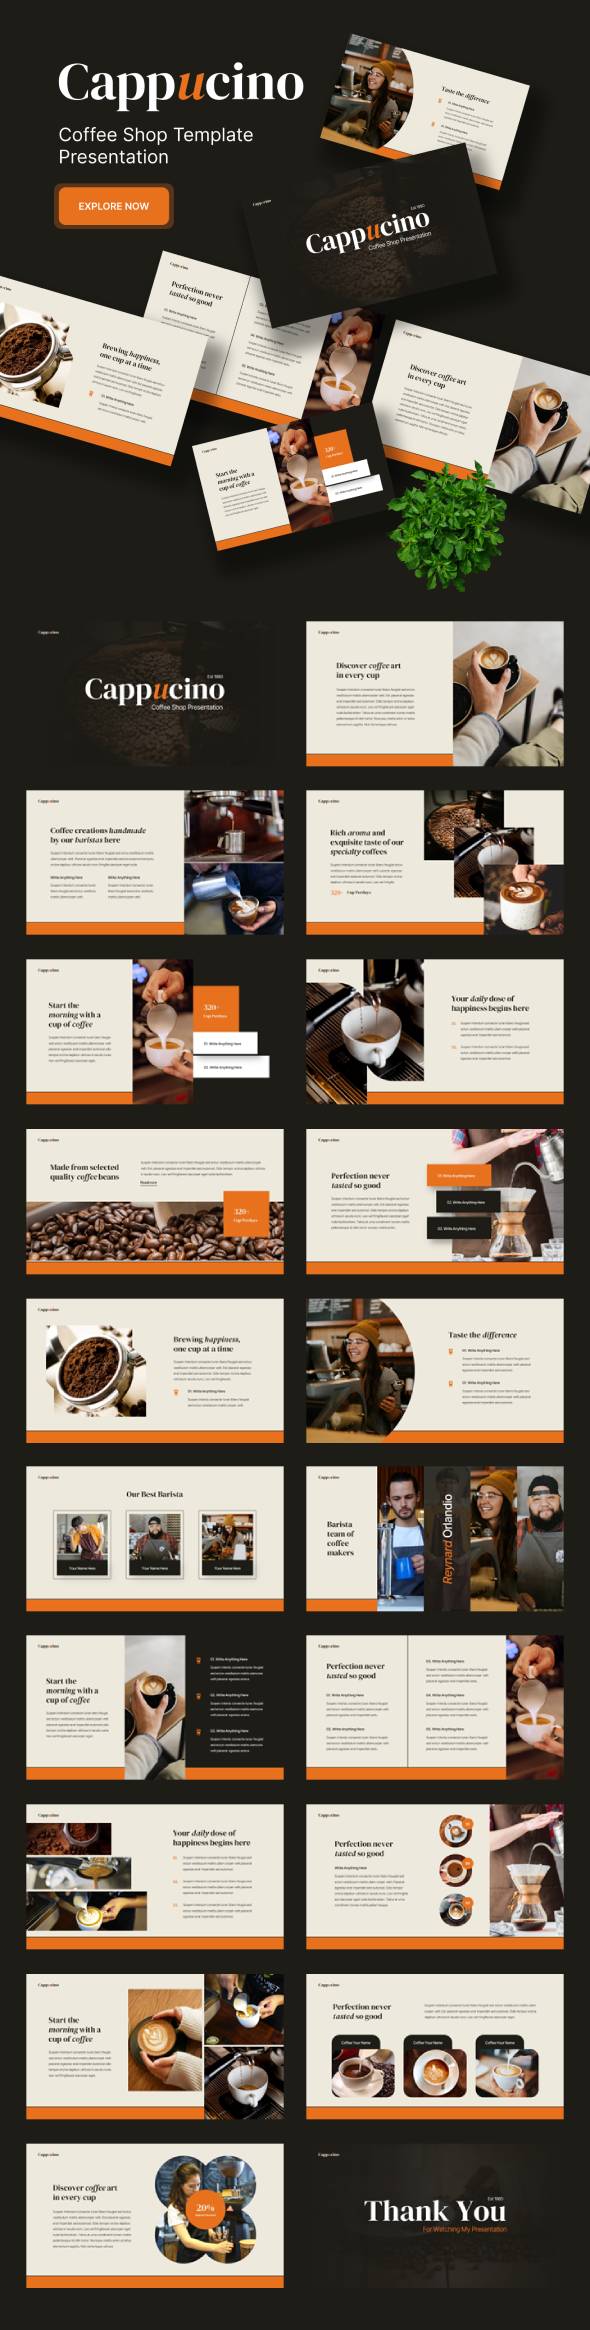 Cappucino - Coffee Shop PowerPoint Template